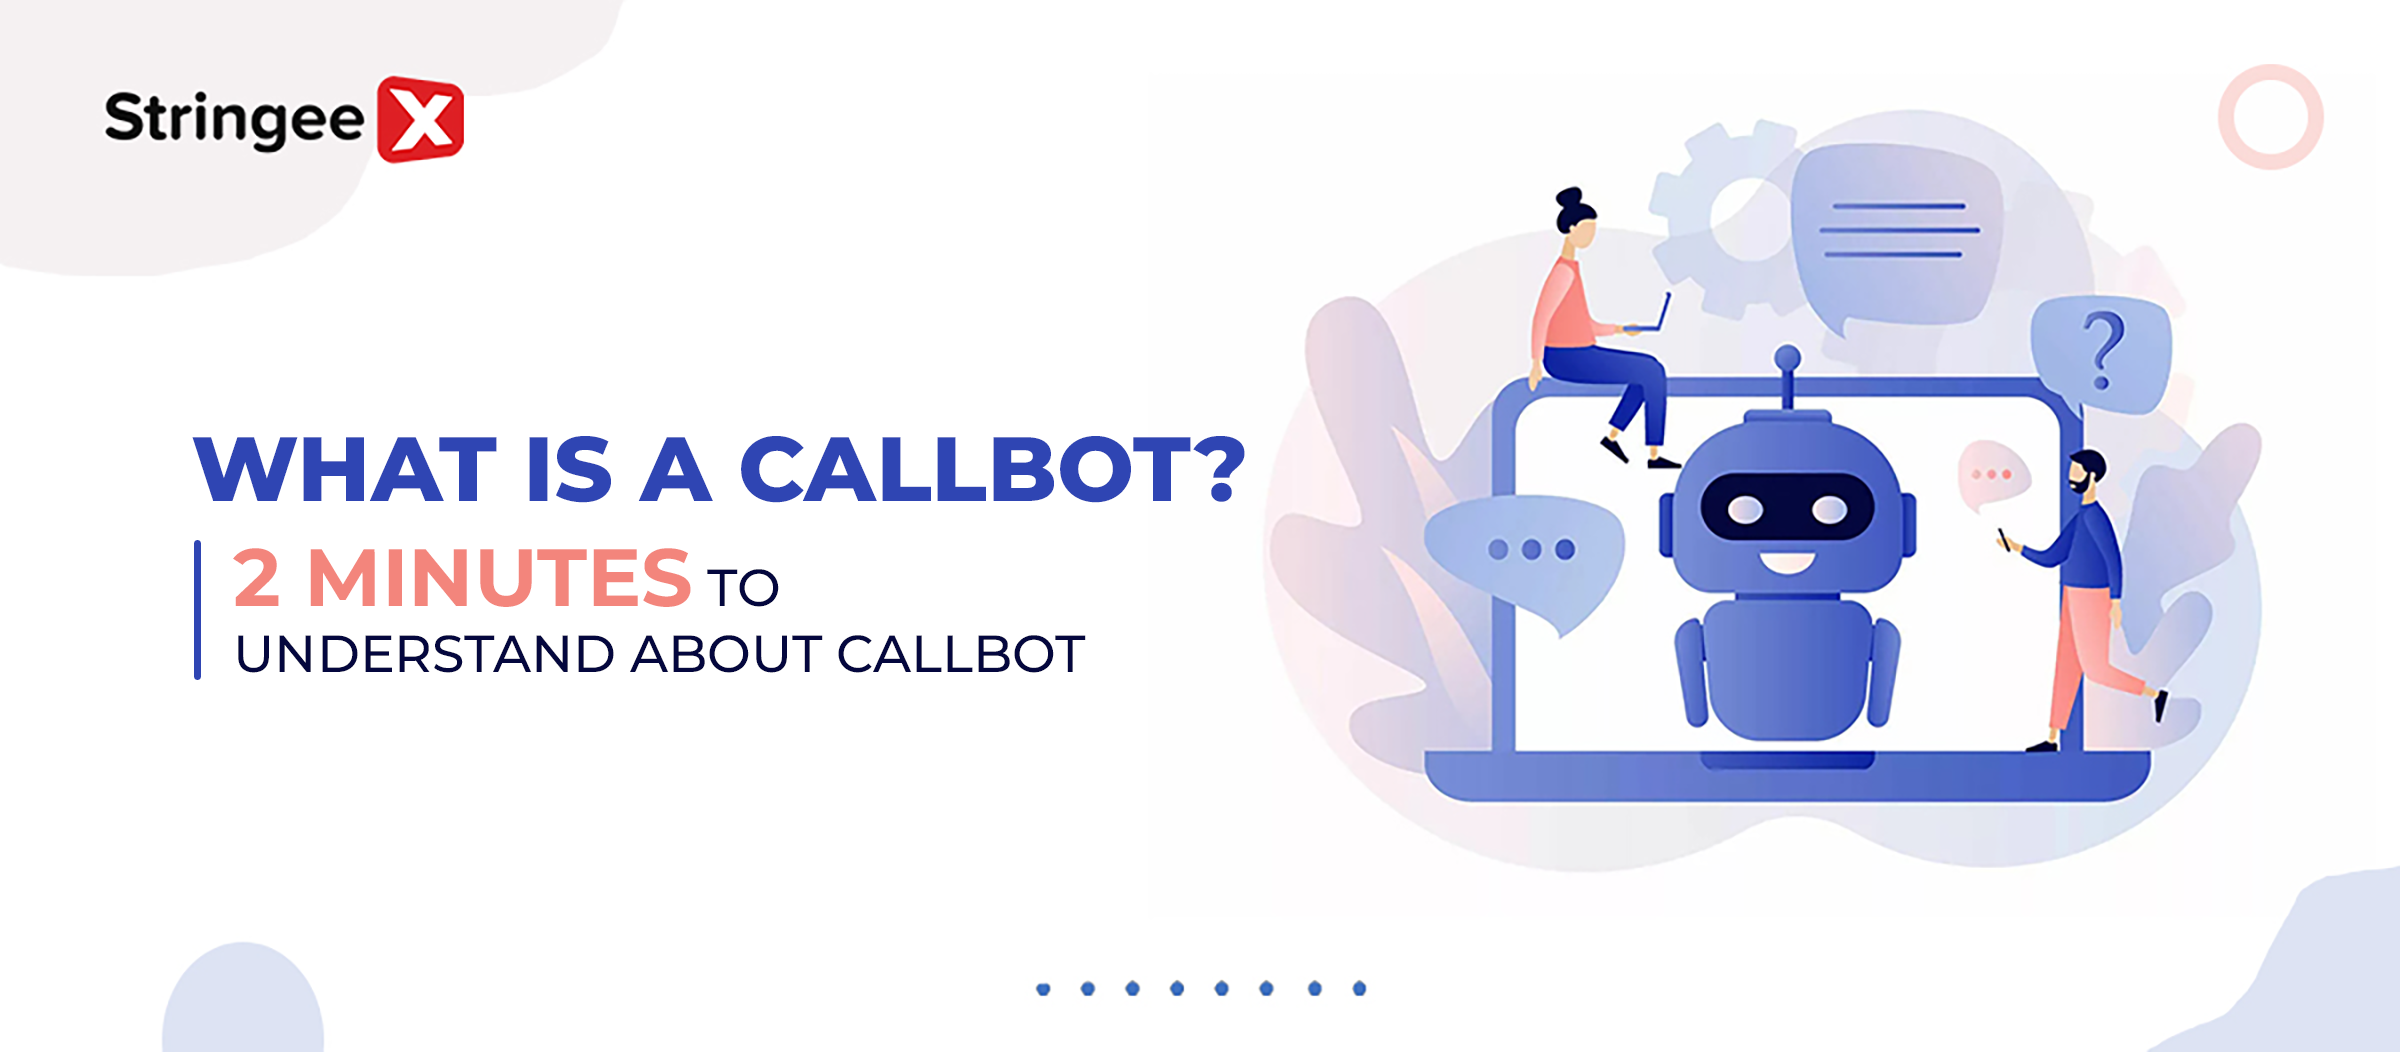 What is a callbot? 2 minutes to understand everything about Callbot